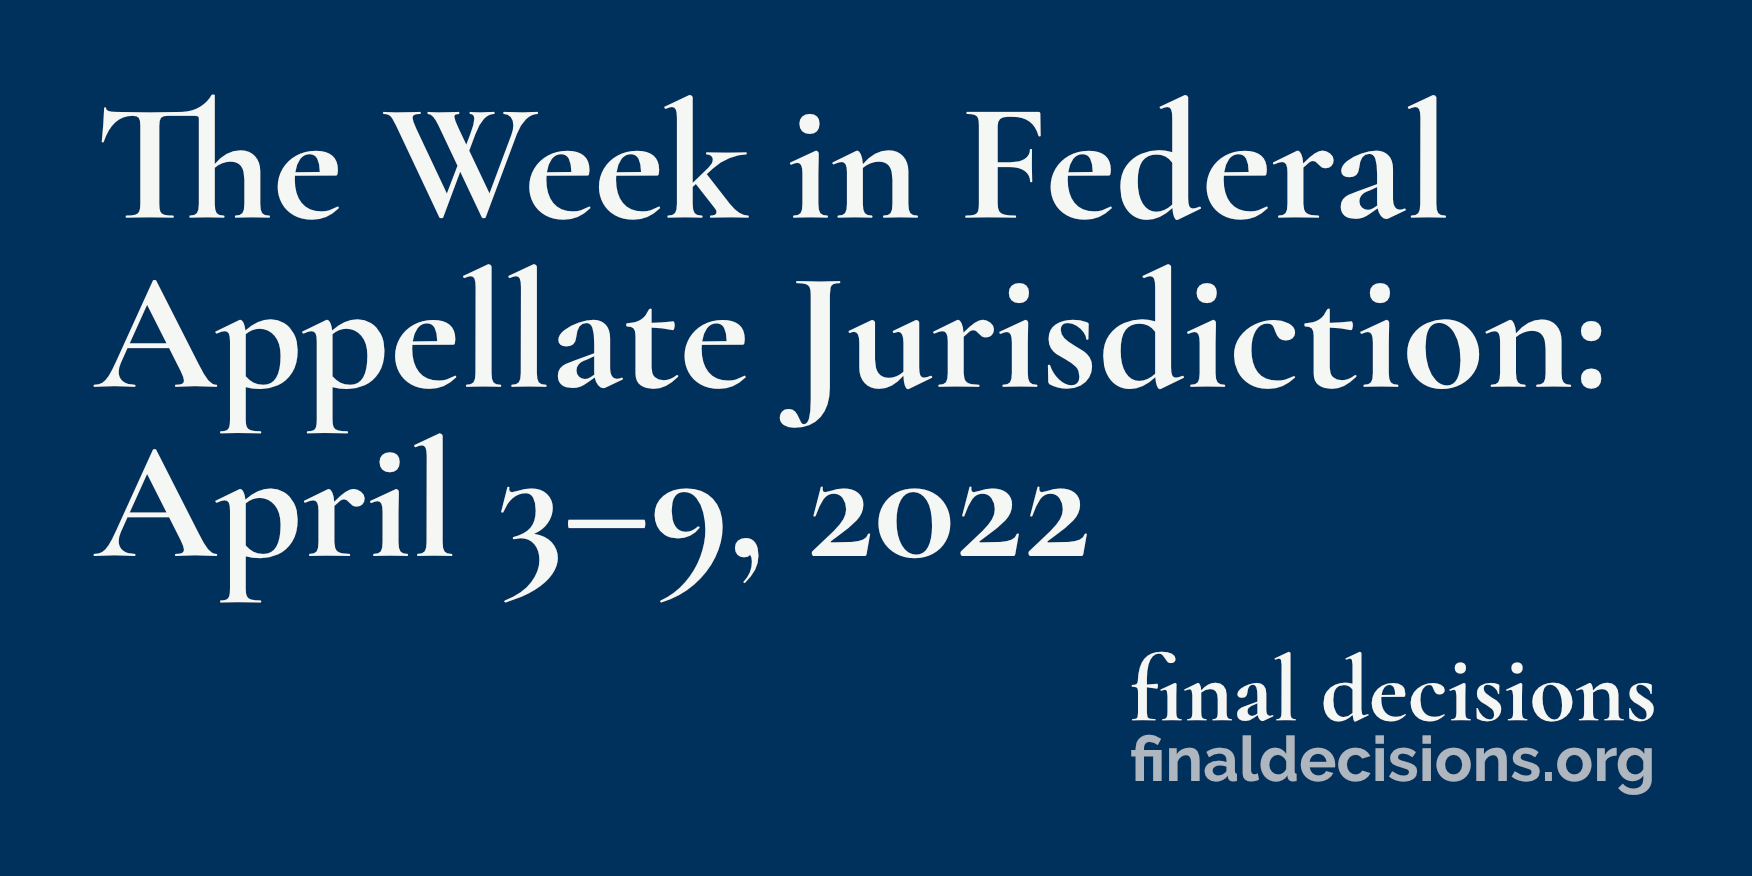 The Week in Federal Appellate Jurisdiction: April 3–9, 2022 - Final